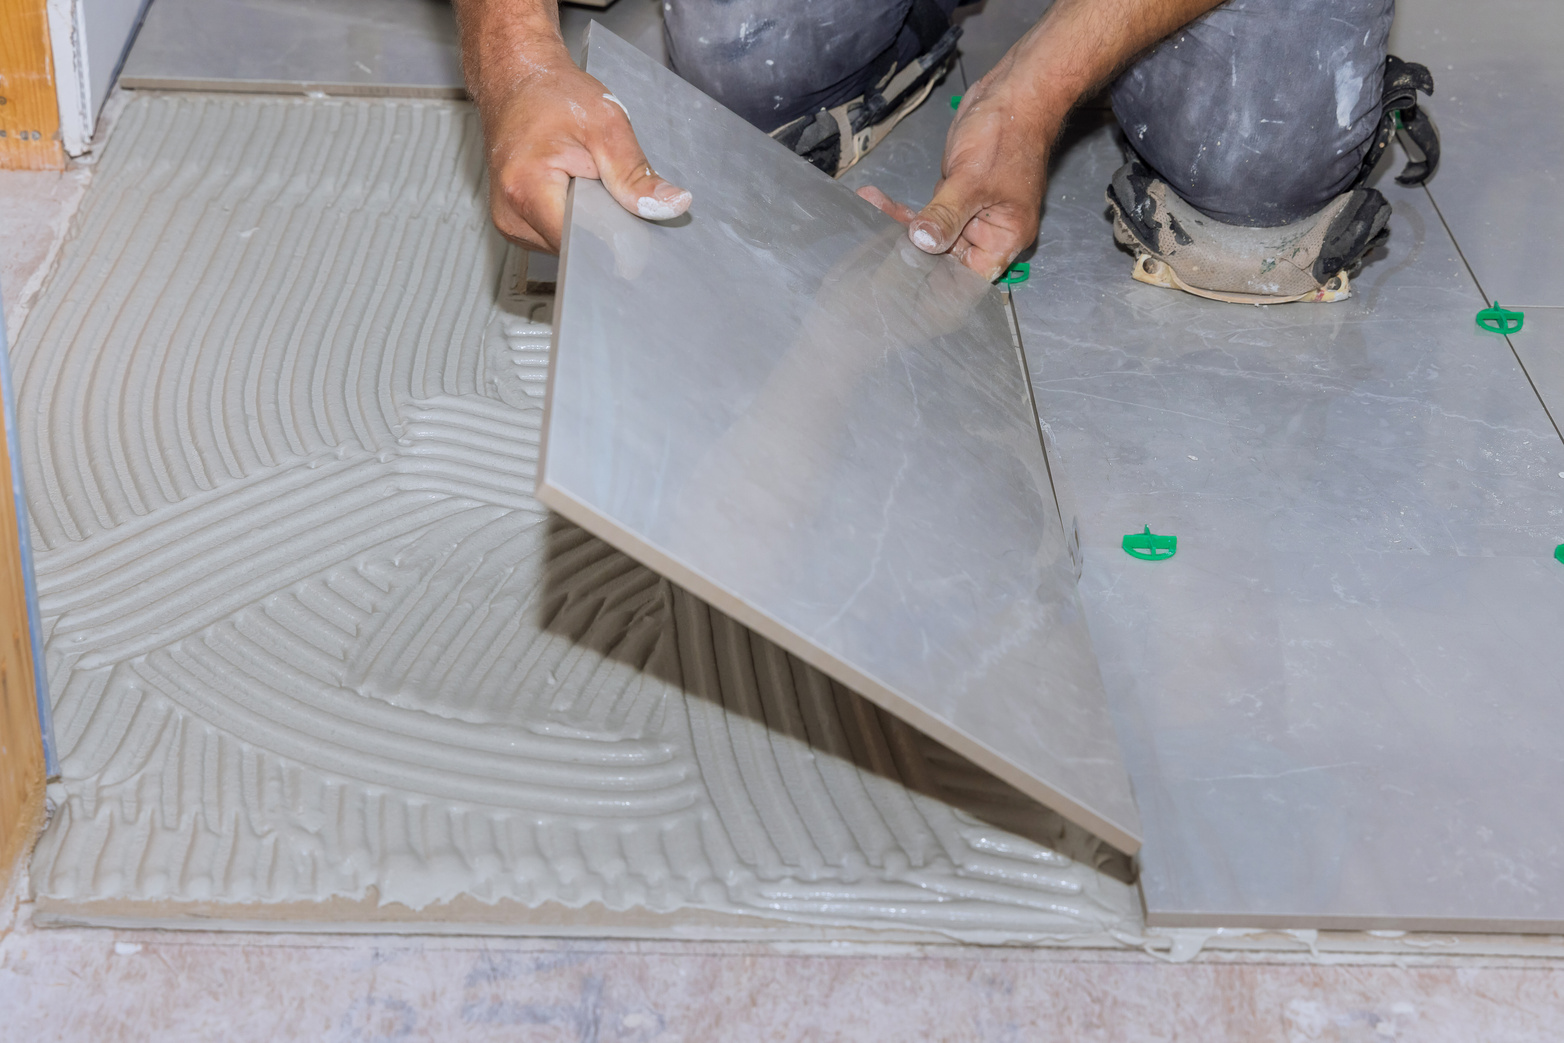 Using adhesive to install ceramic floor tiles in a home cons